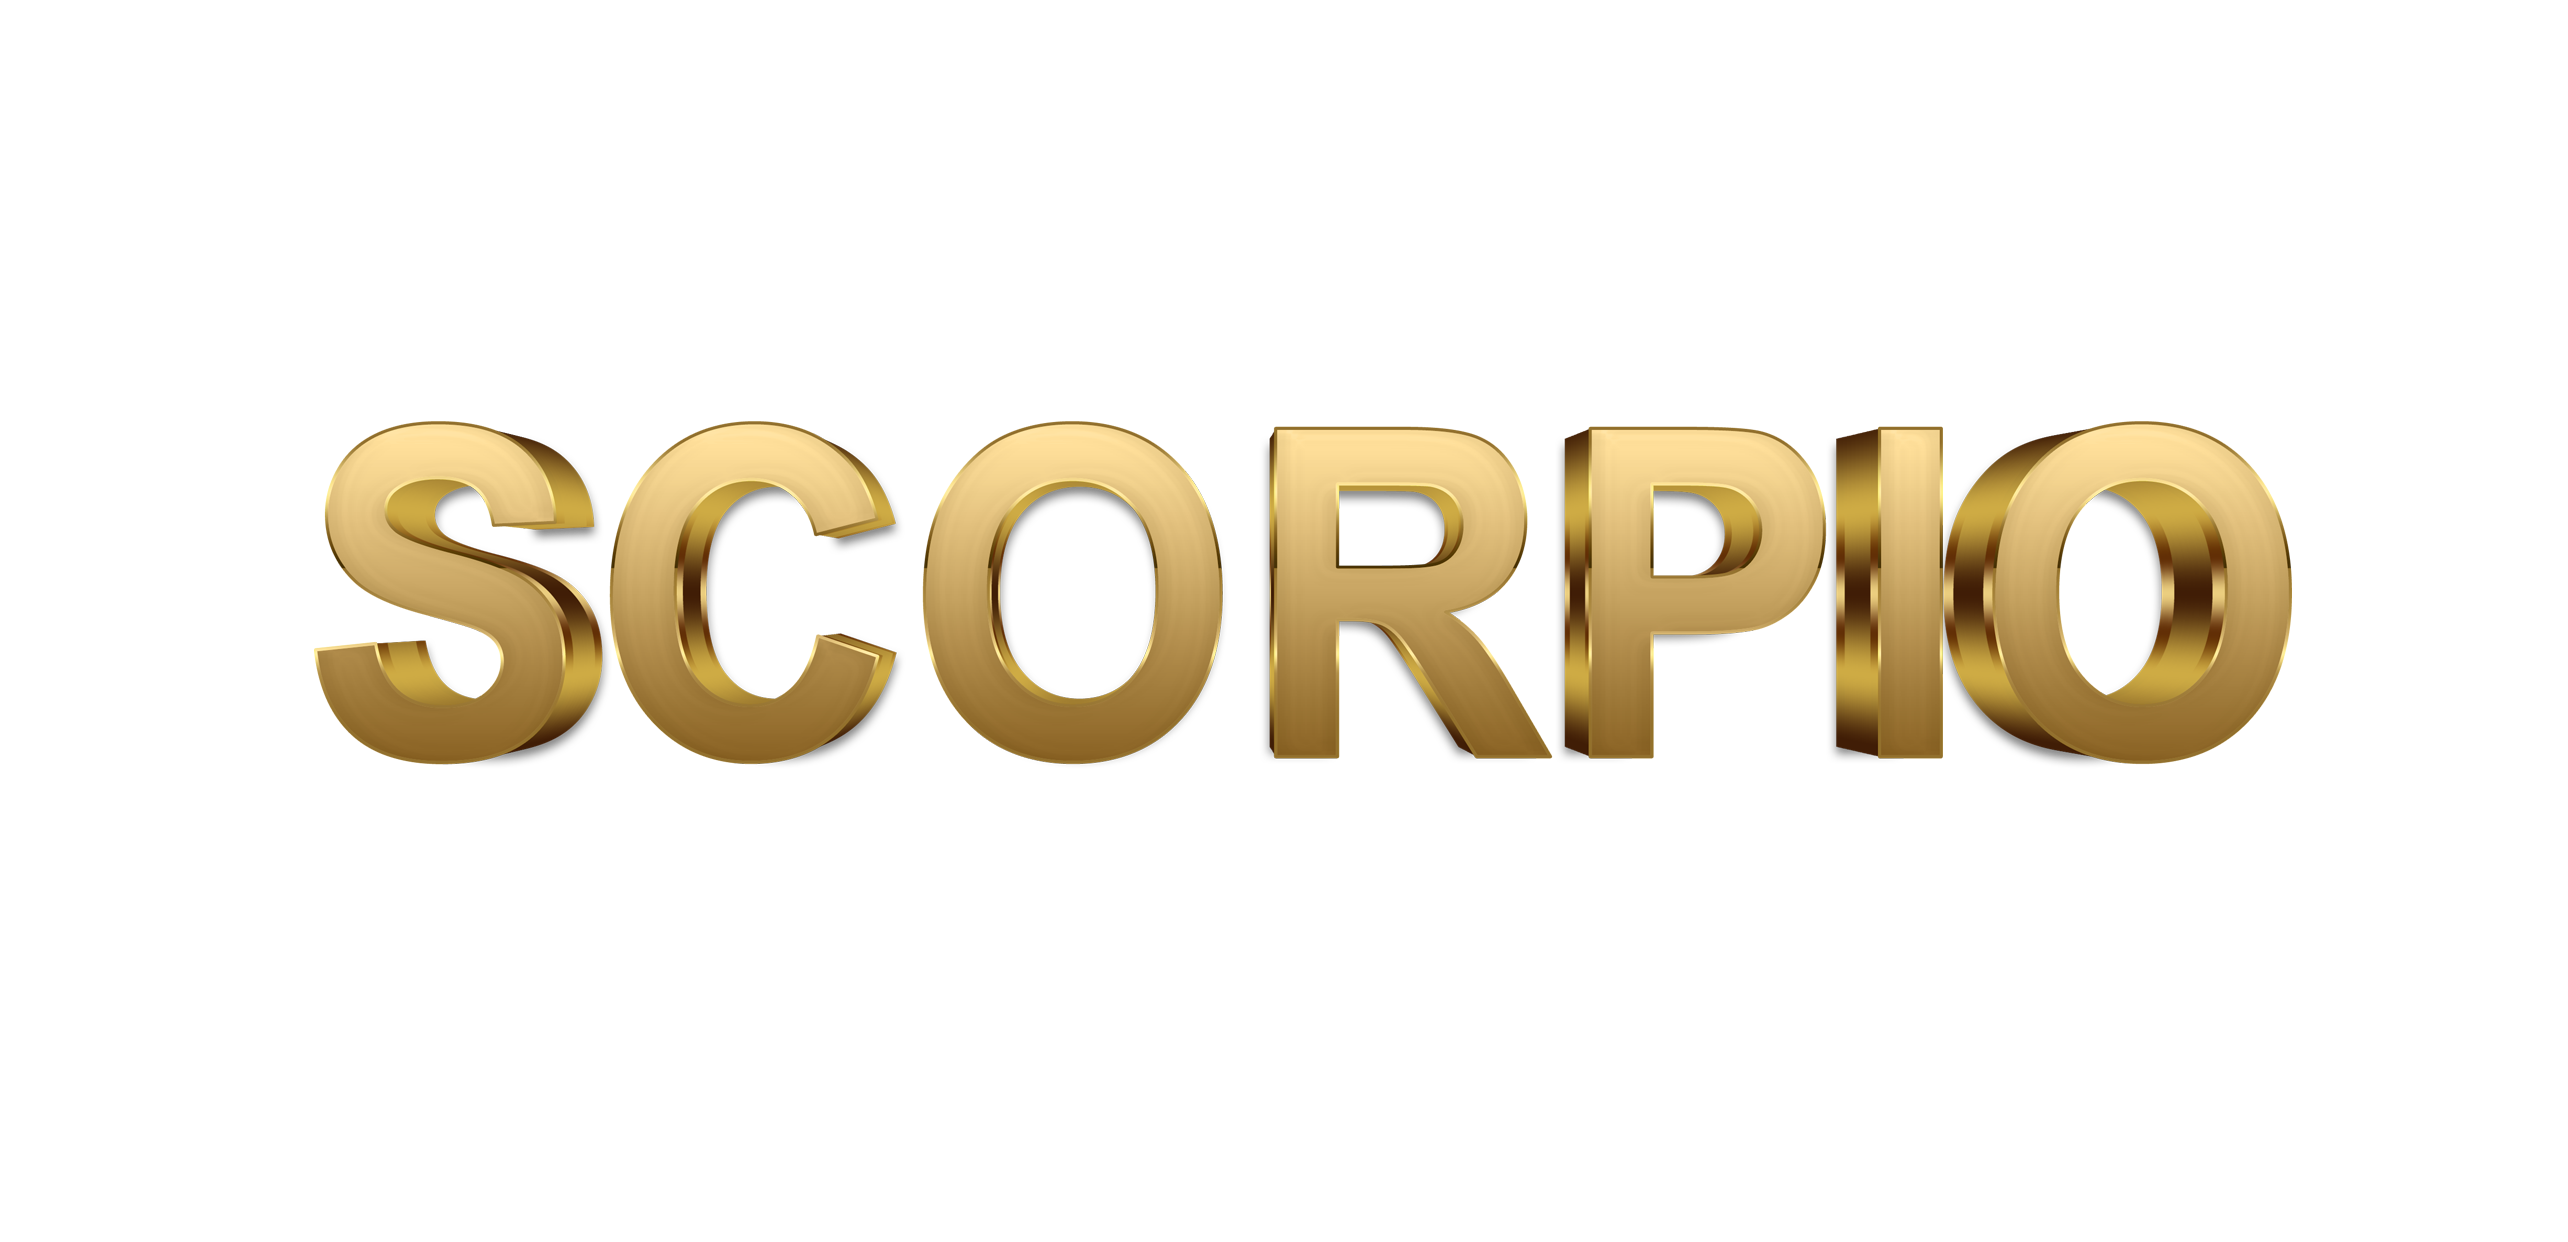 Scorpio word png, Scorpio png, word Scorpio gold text typography PNG images free